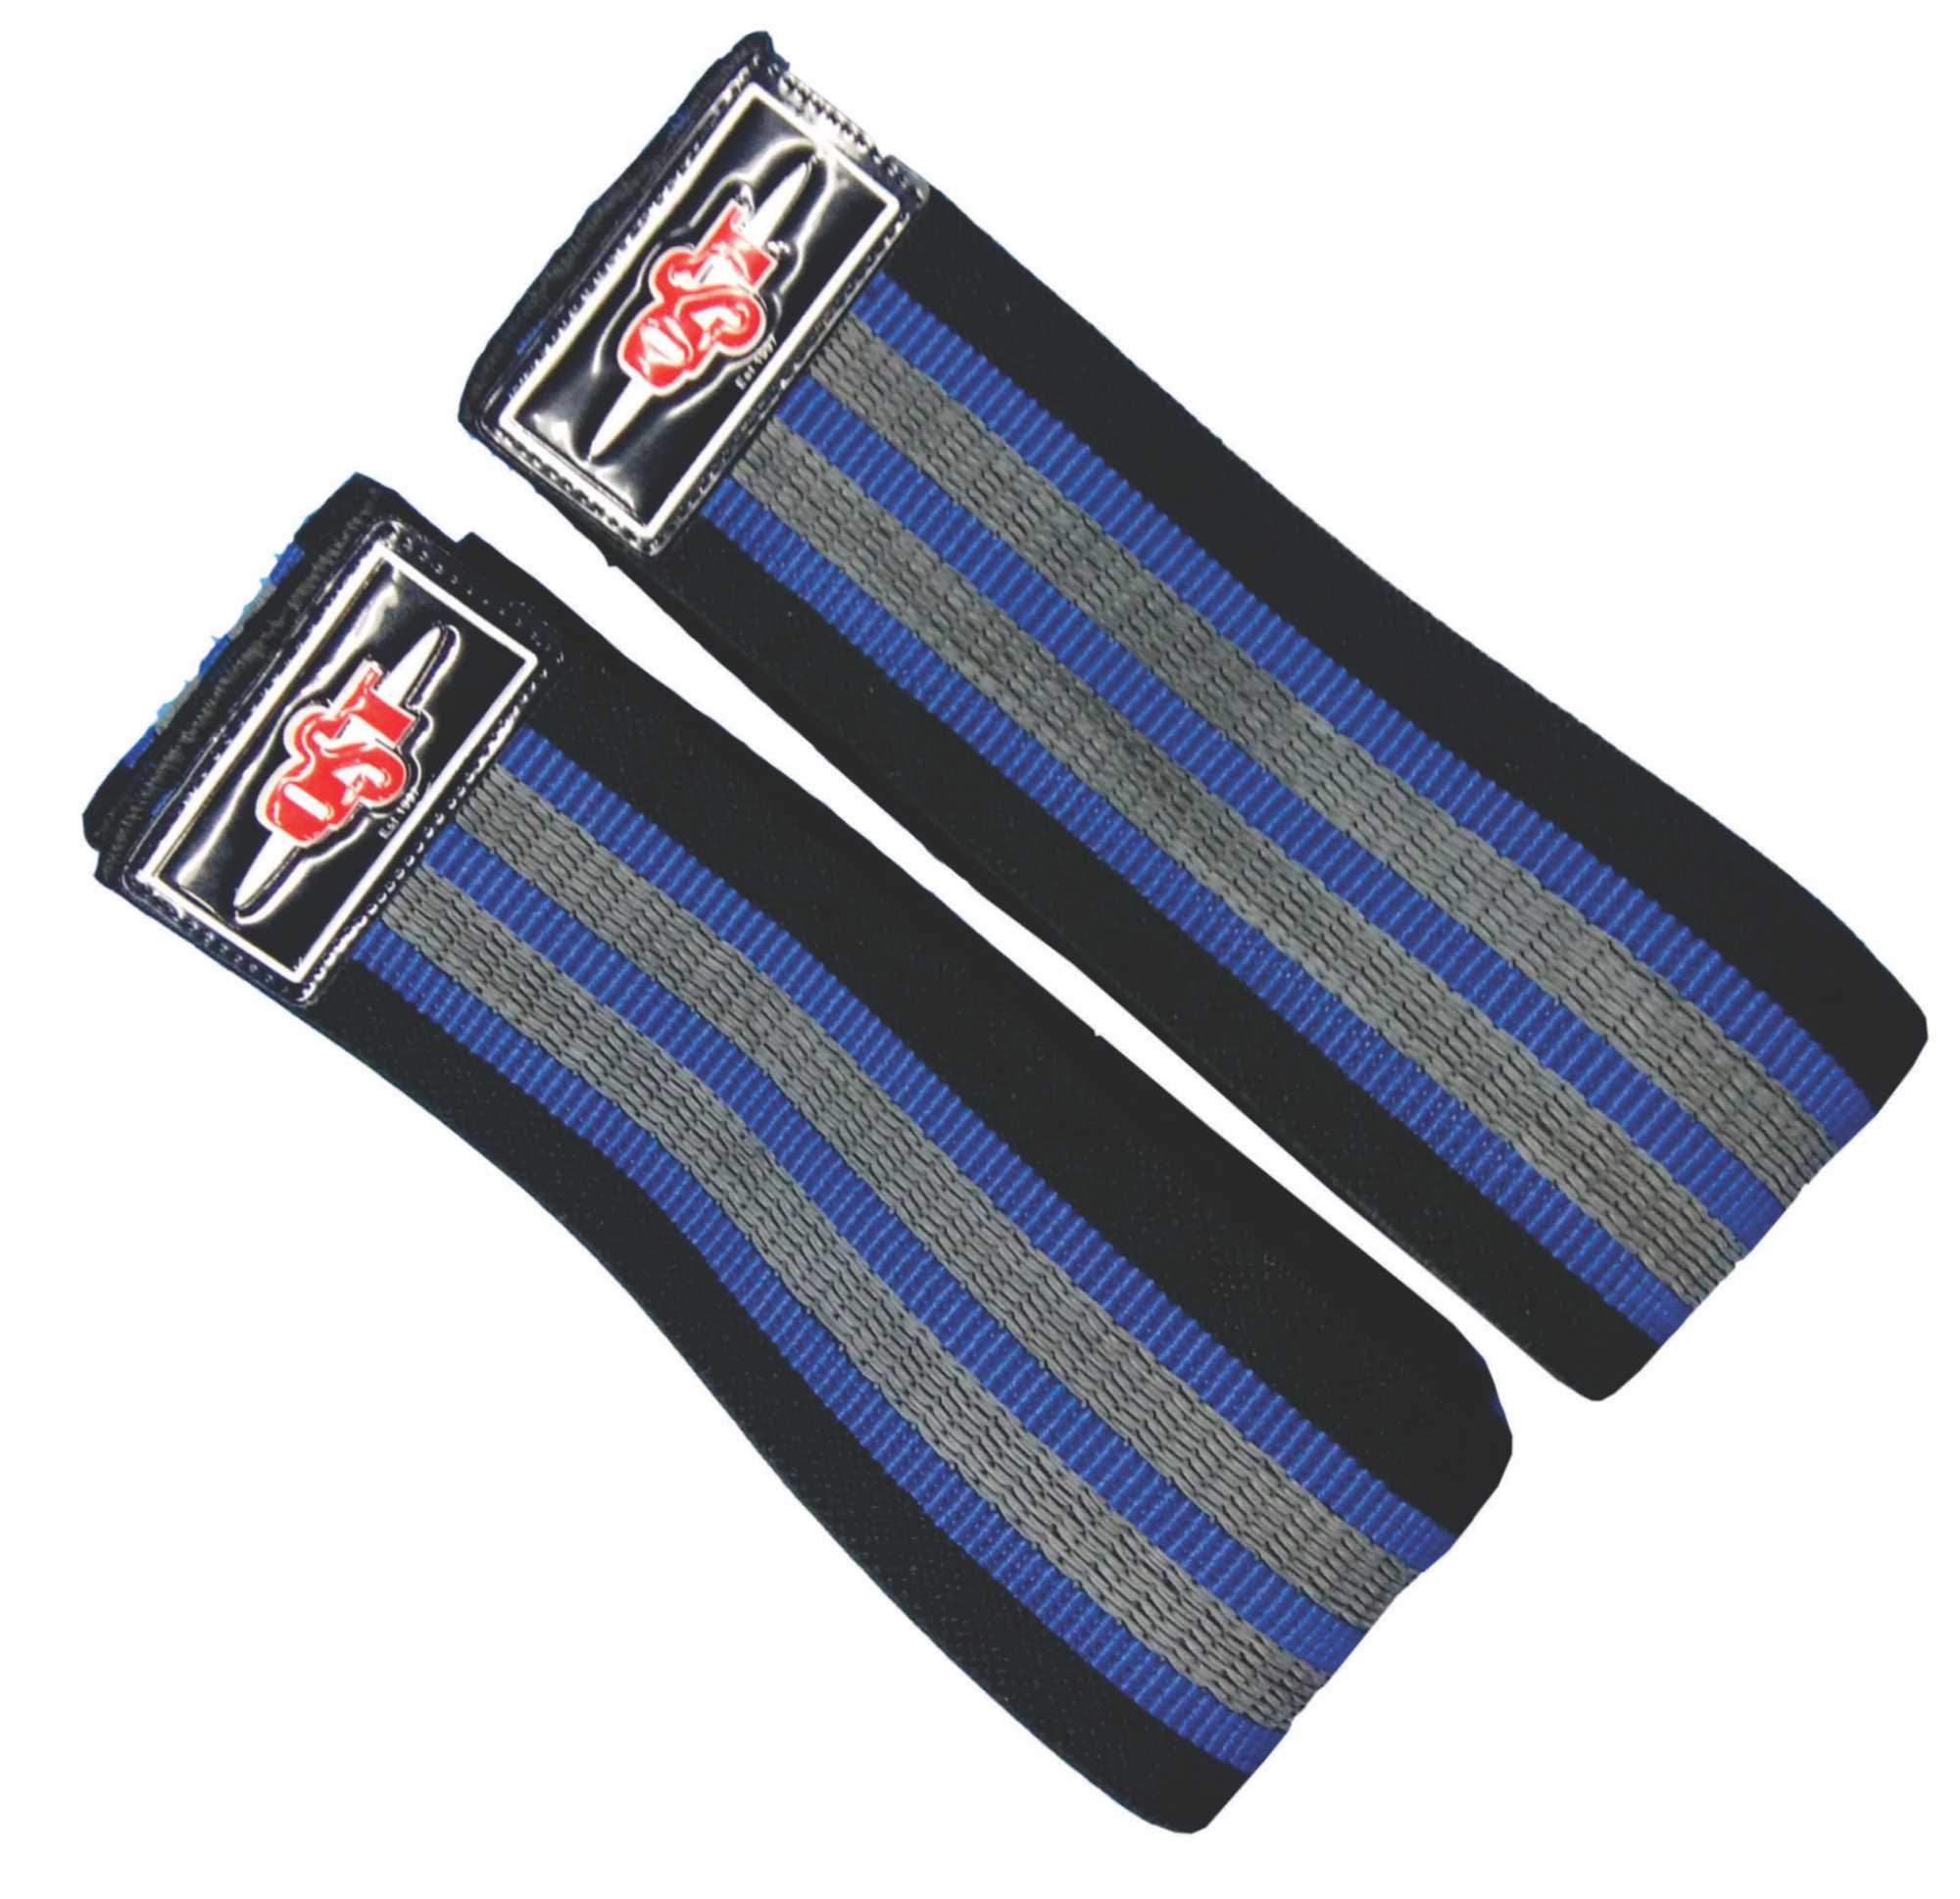 Weightlifting Knee Wraps - ACS-1349